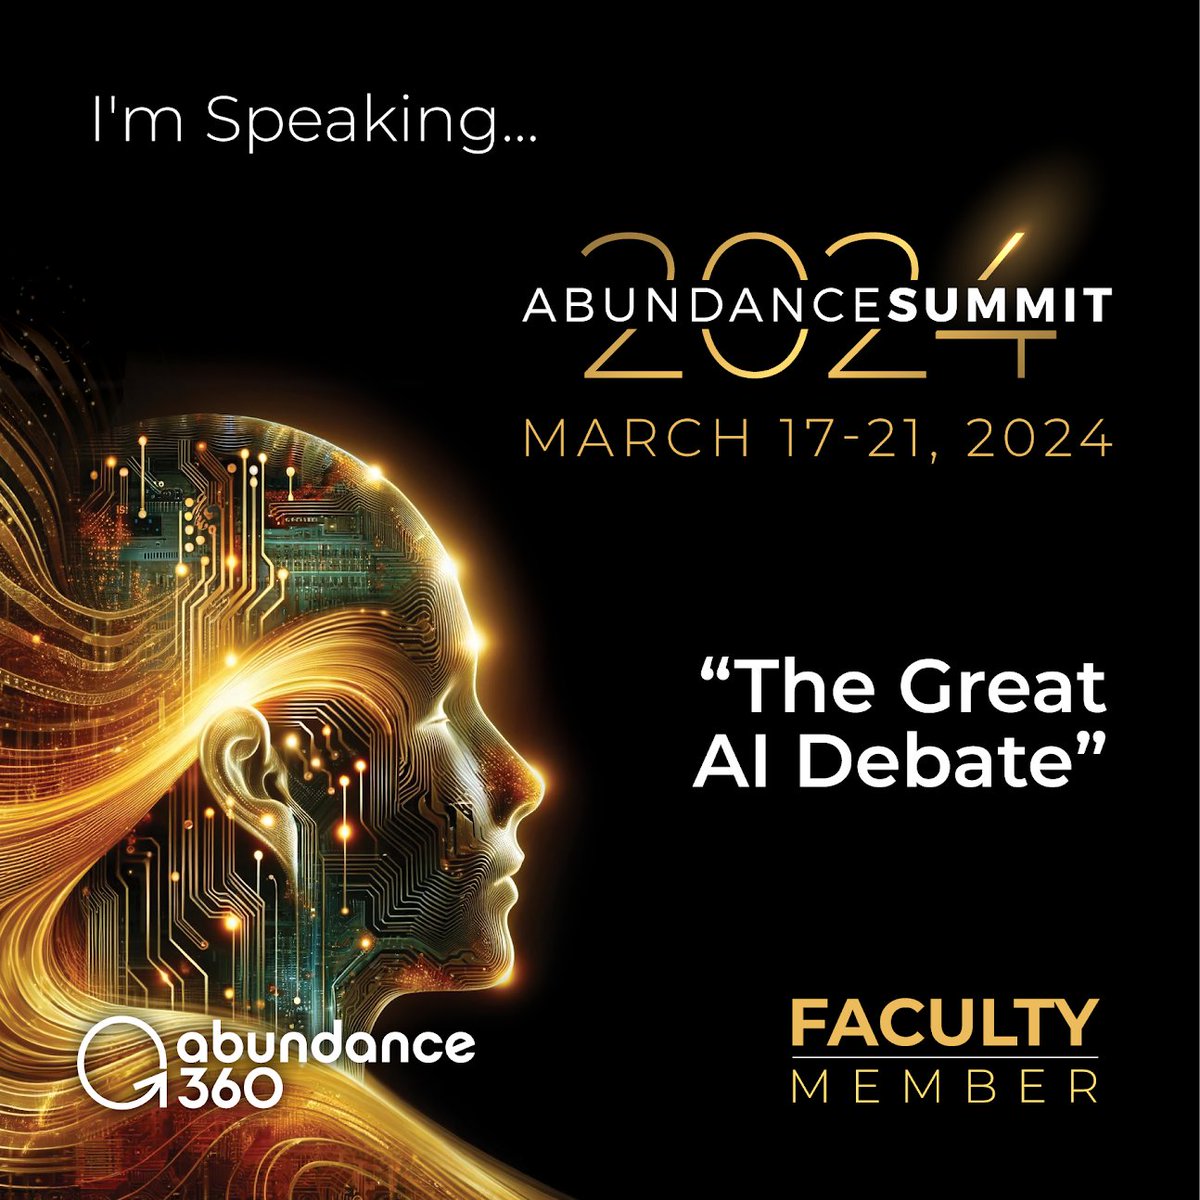 Excited to share my poetic perspective, inspiration, heart and hope and around the topic of AI at the Abundance Summit – where leaders from around the world are meeting to discuss the future! Details: a360.com/summit #AbundanceSummit2024 @Abundance360 @peterdiamandis